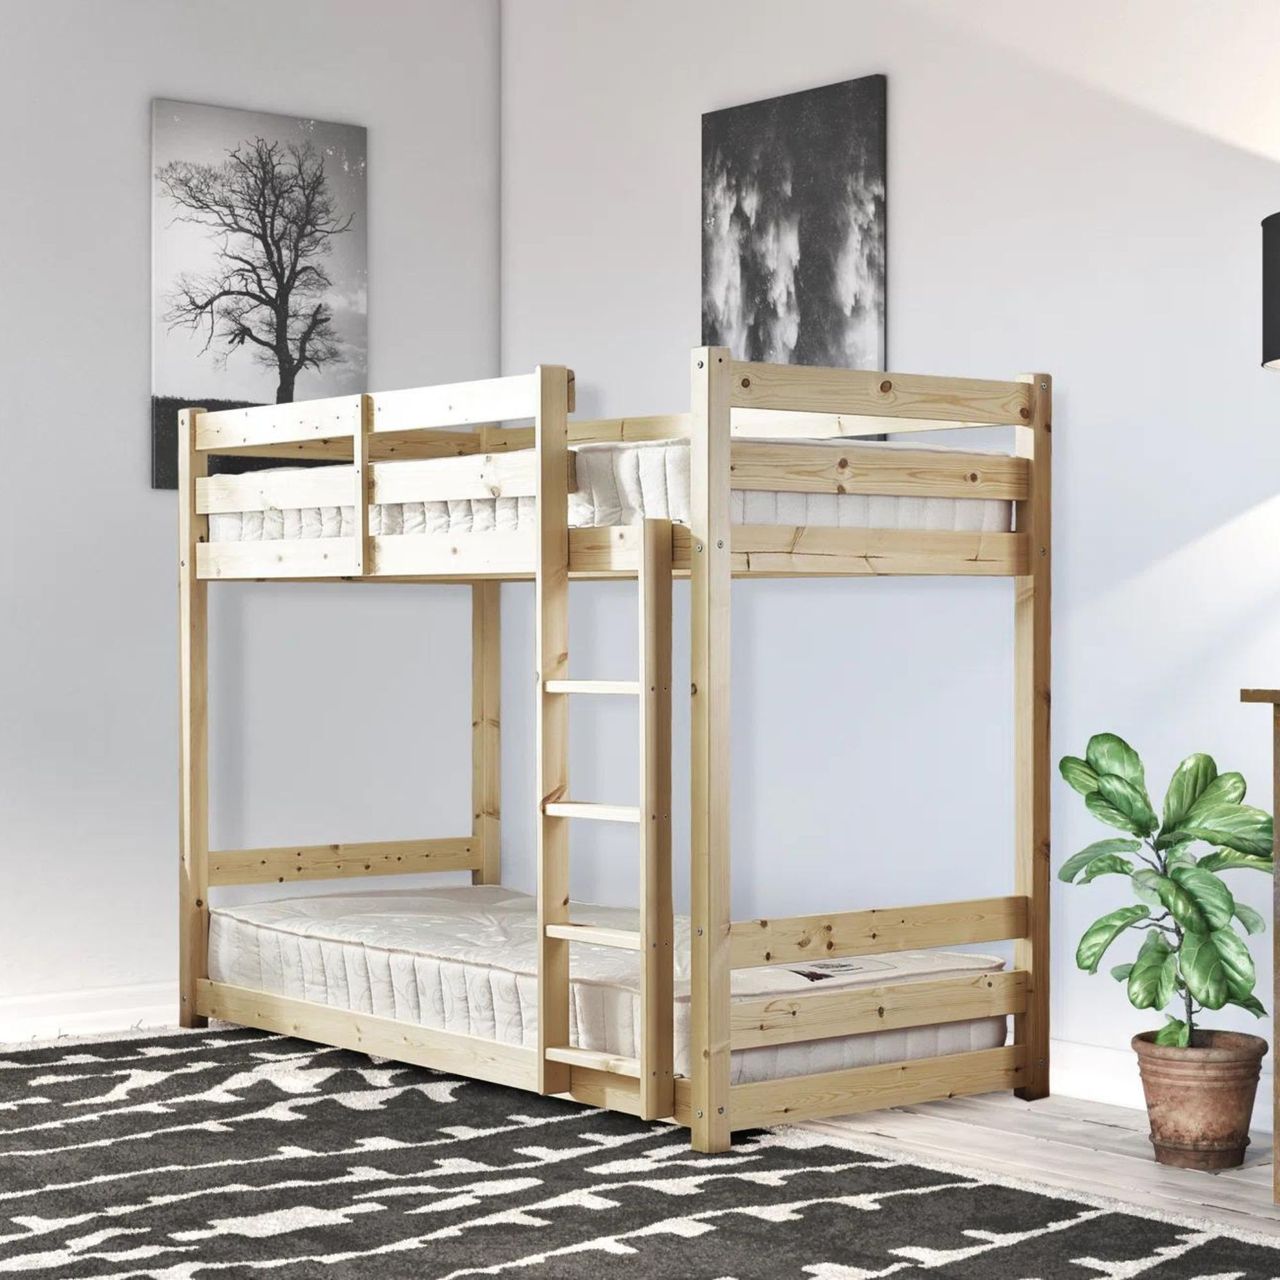 15 of our favourite bunk beds for style, practicality and fun | Real Homes